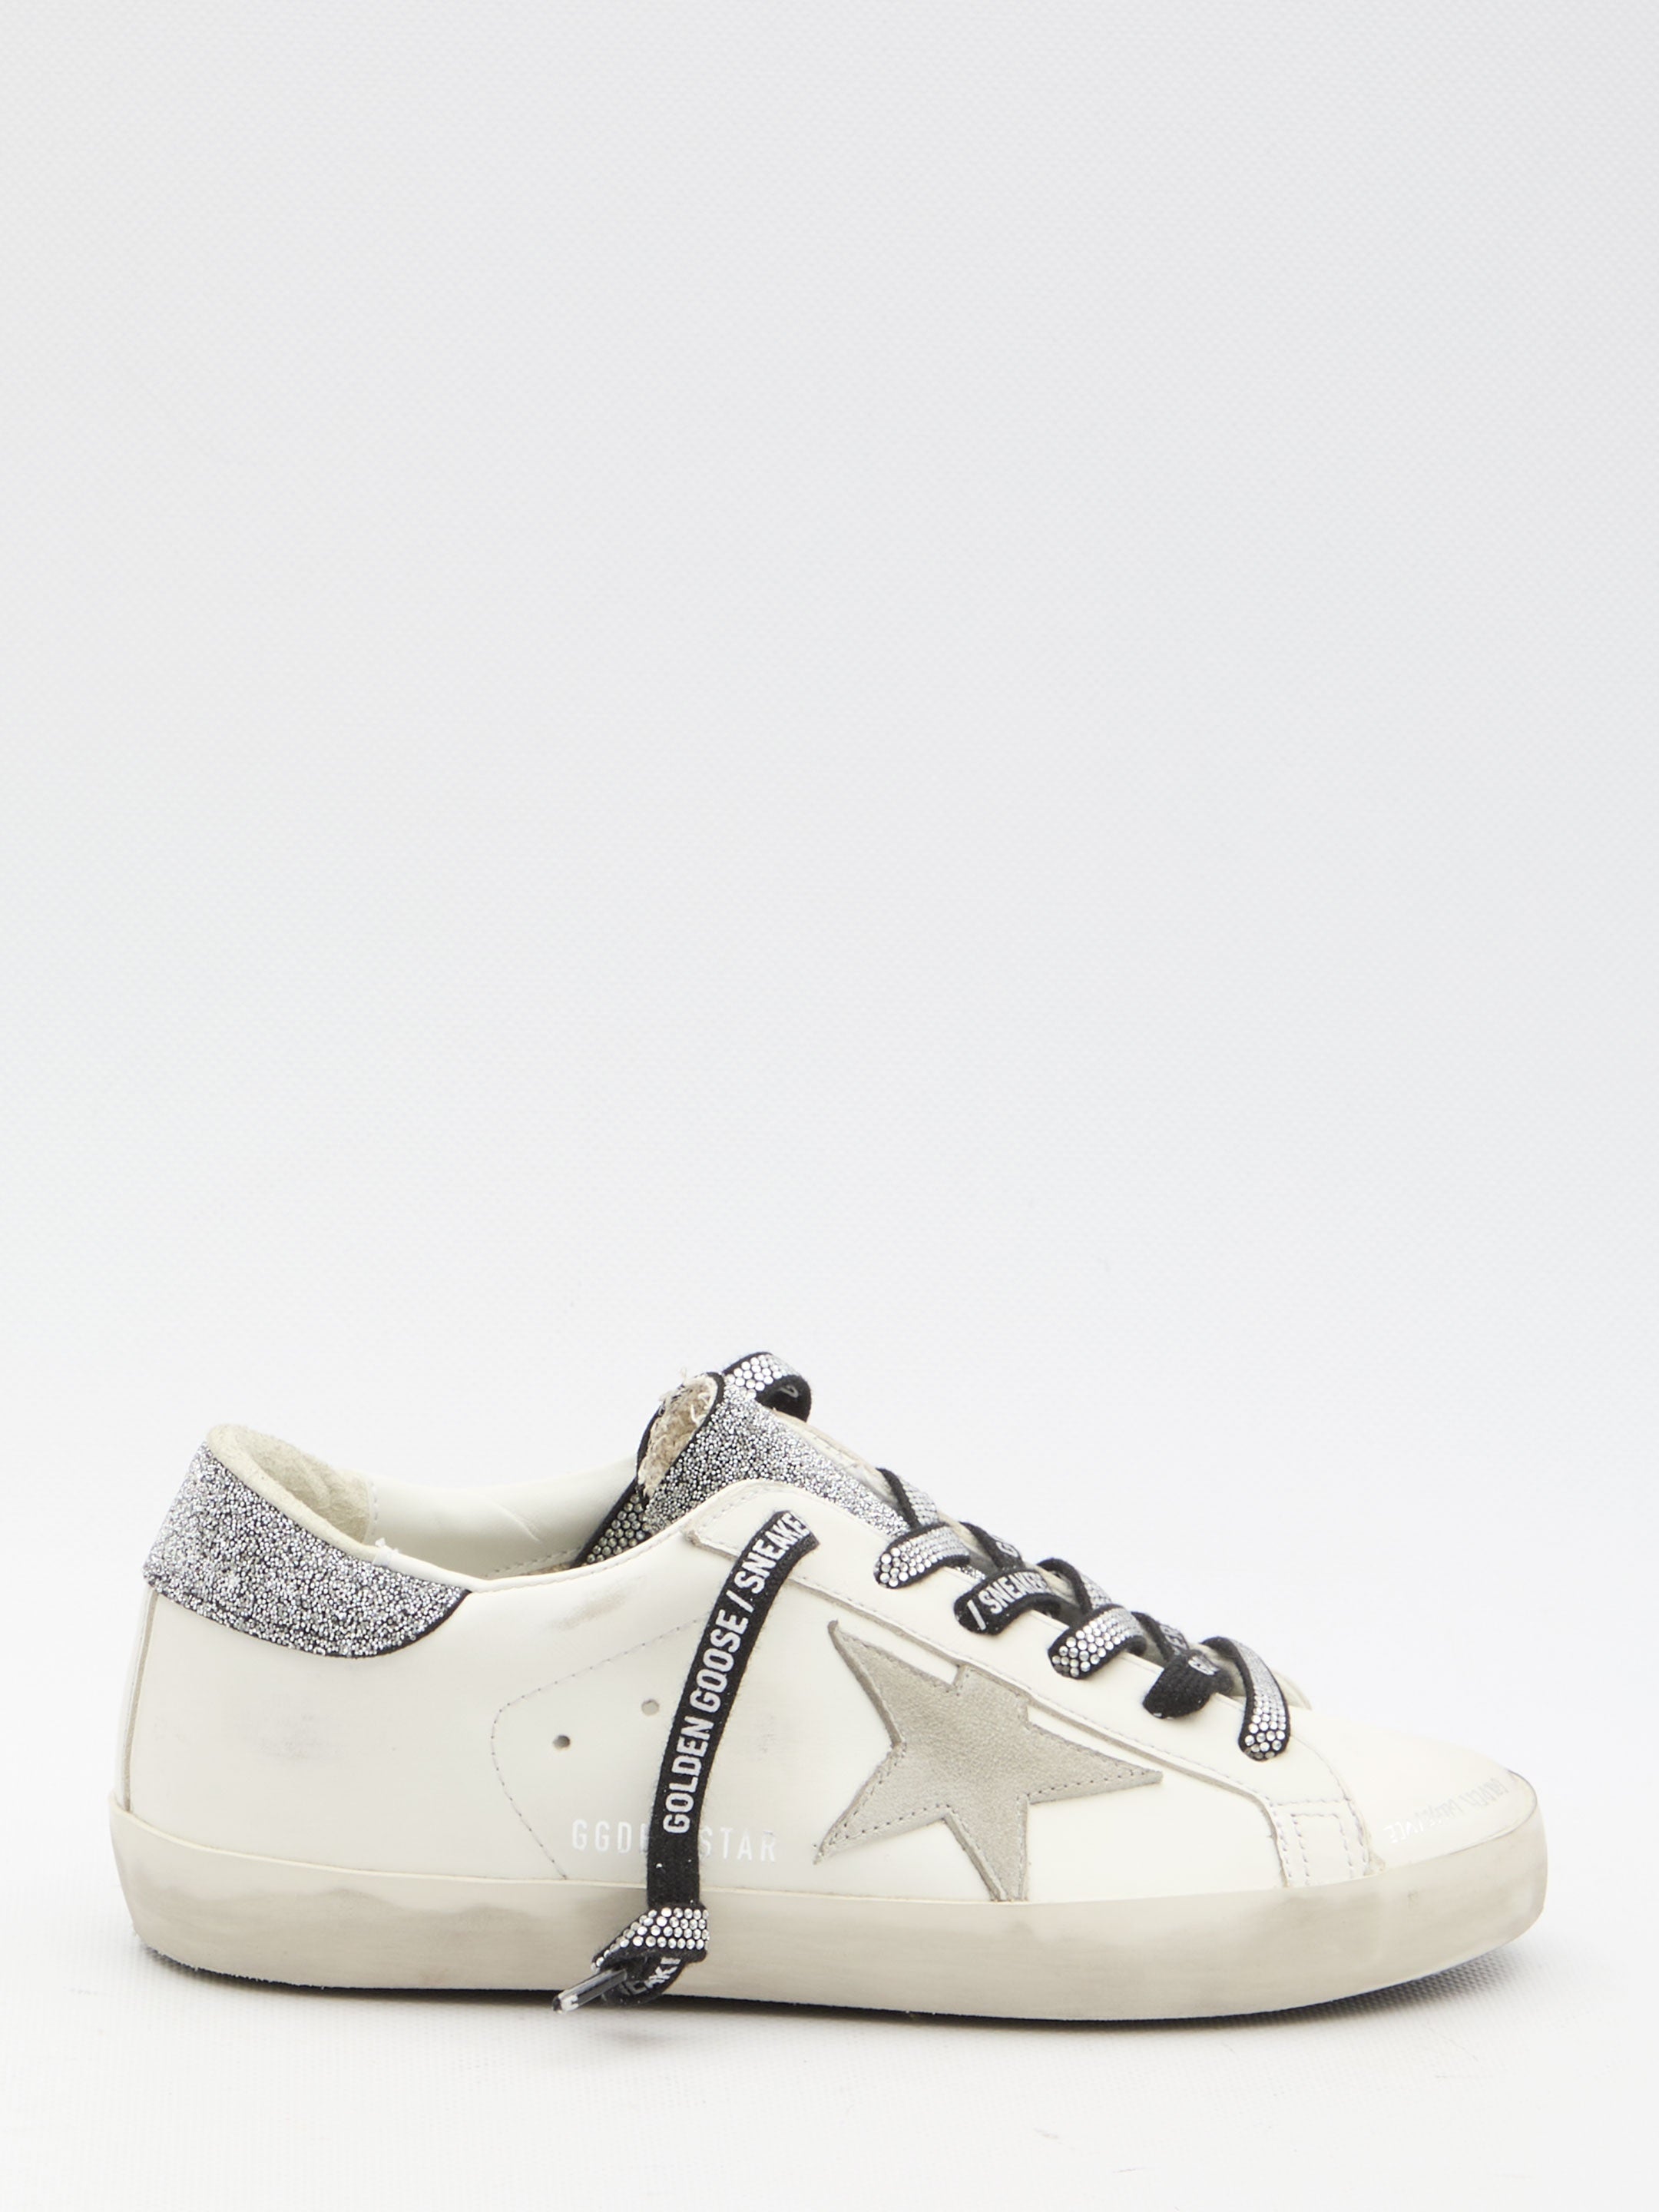 GOLDEN-GOOSE-OUTLET-SALE-Super-Star-sneakers-Sneakers-36-WHITE-ARCHIVE-COLLECTION_7510af77-4e0e-4d9e-9f09-7ab37efc1f5b.jpg